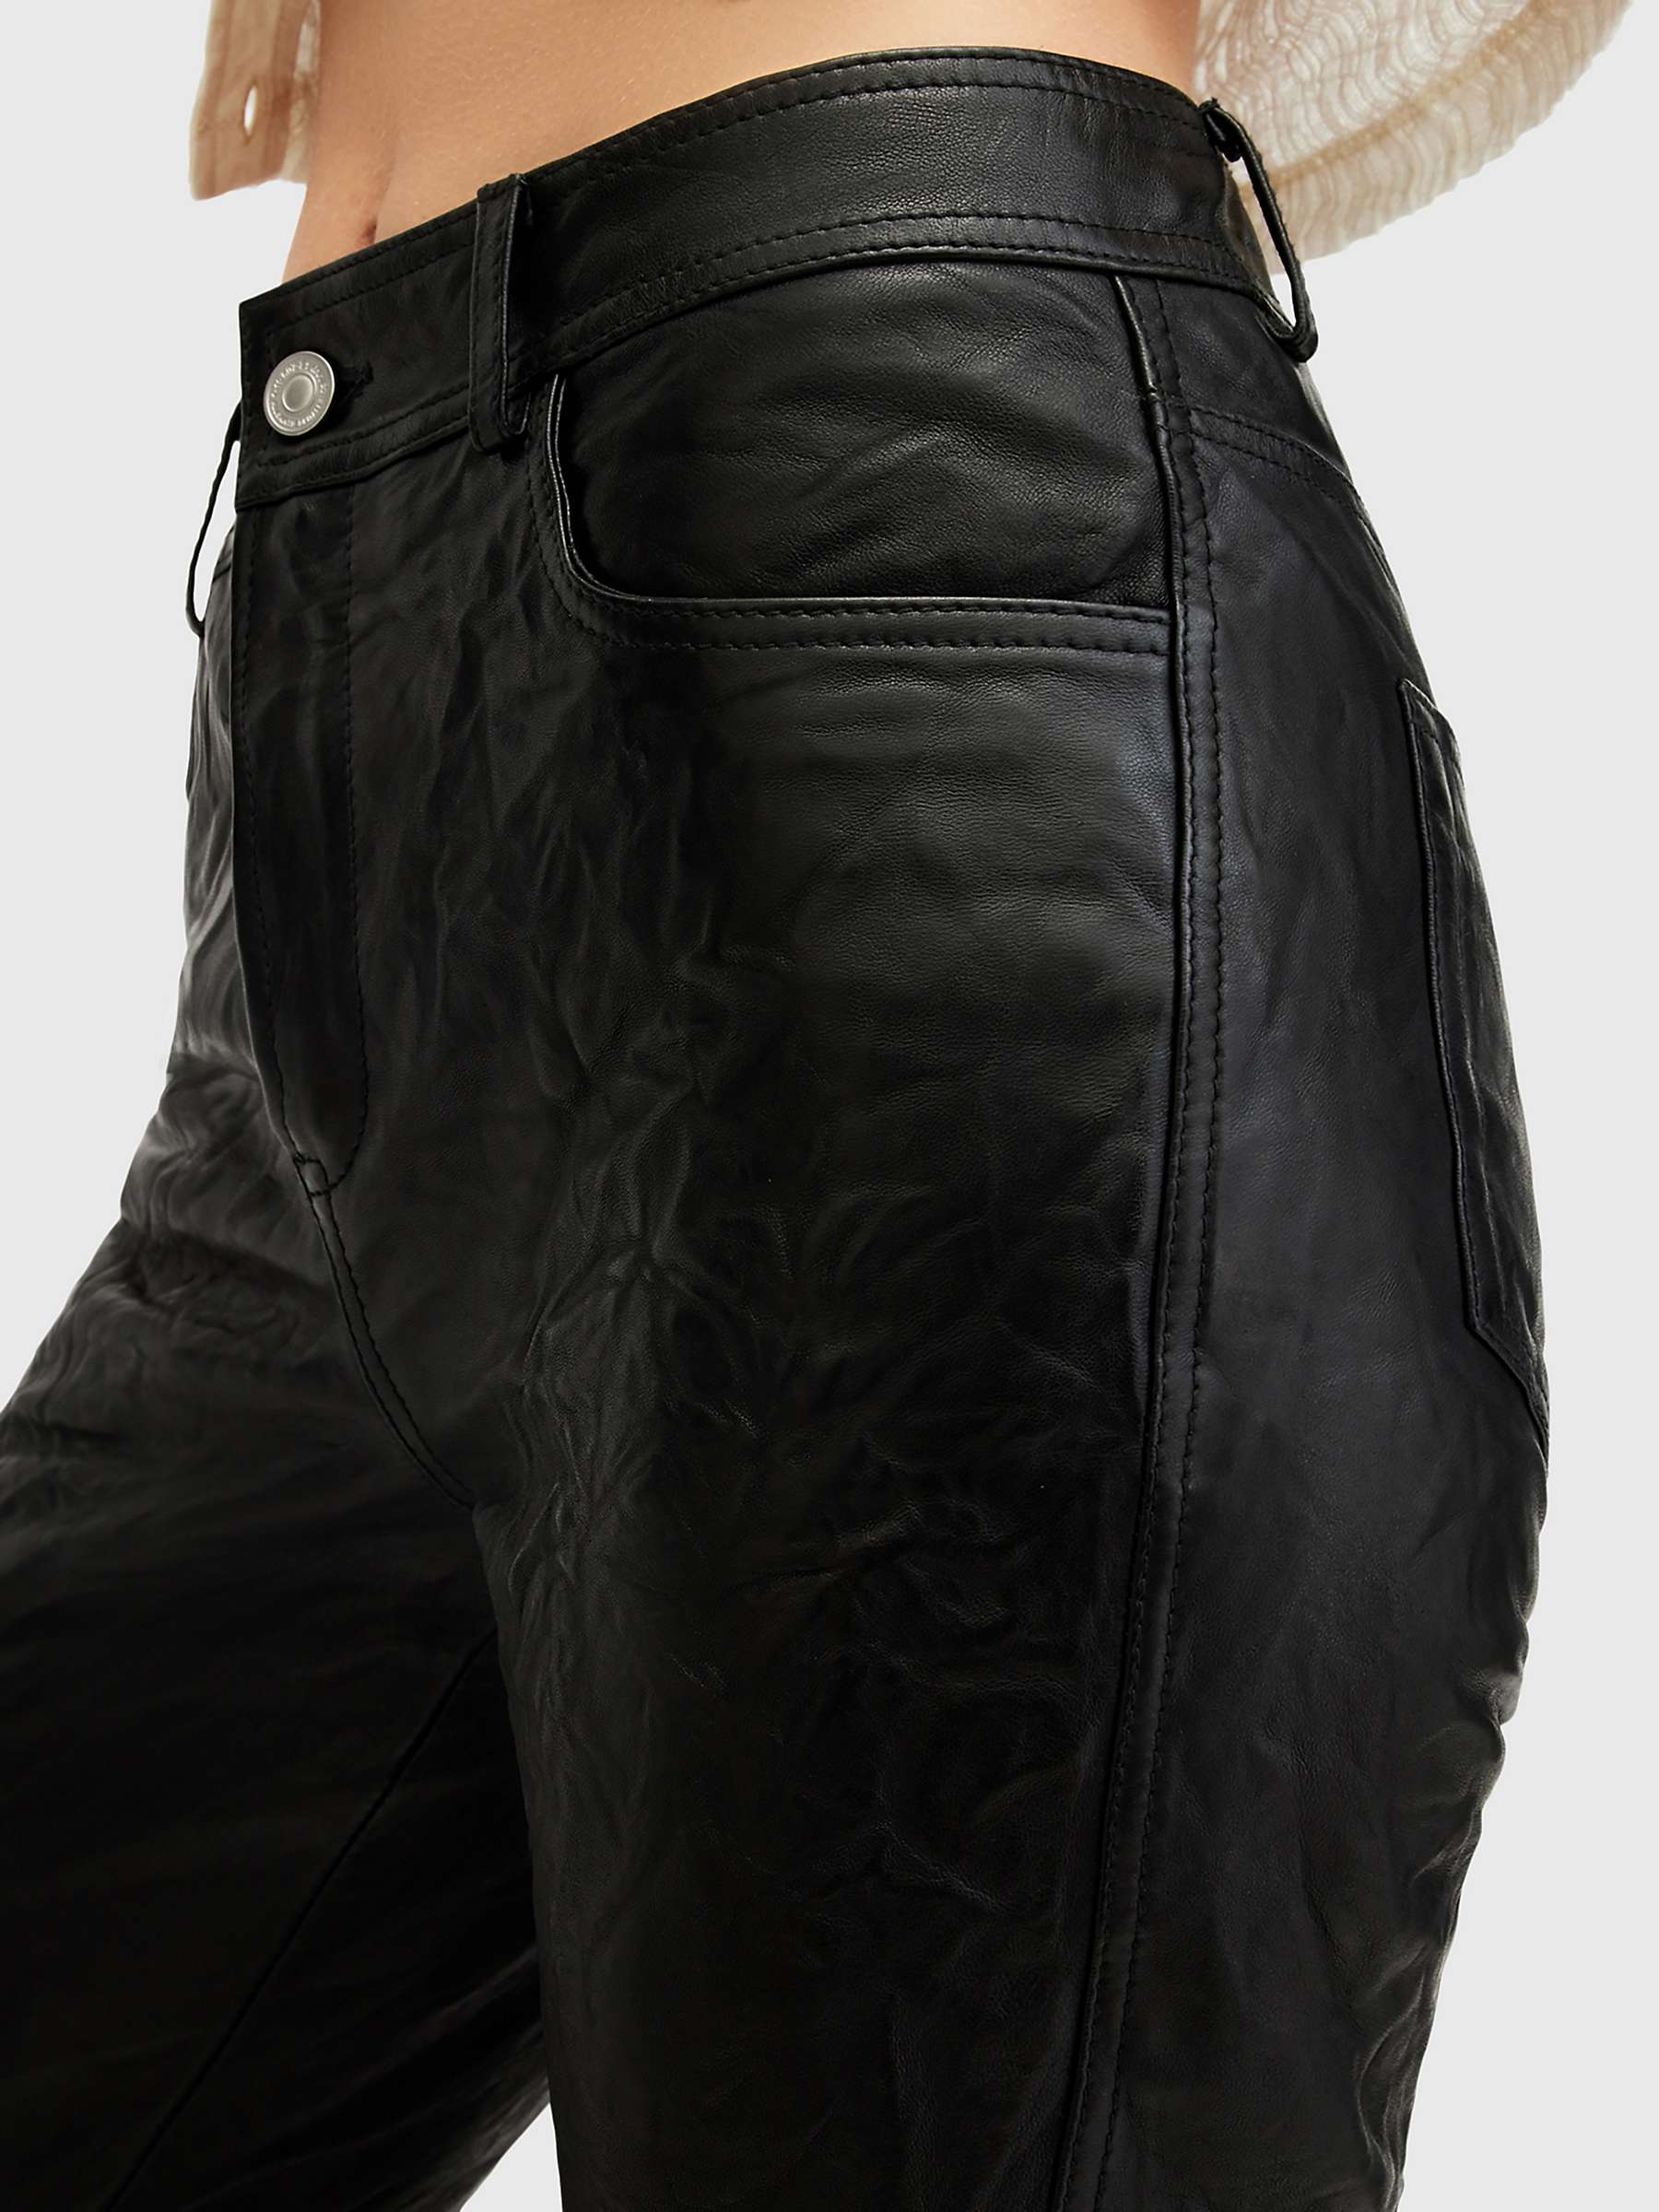 Buy AllSaints Pearson Leather Bootcut Trousers, Black Online at johnlewis.com